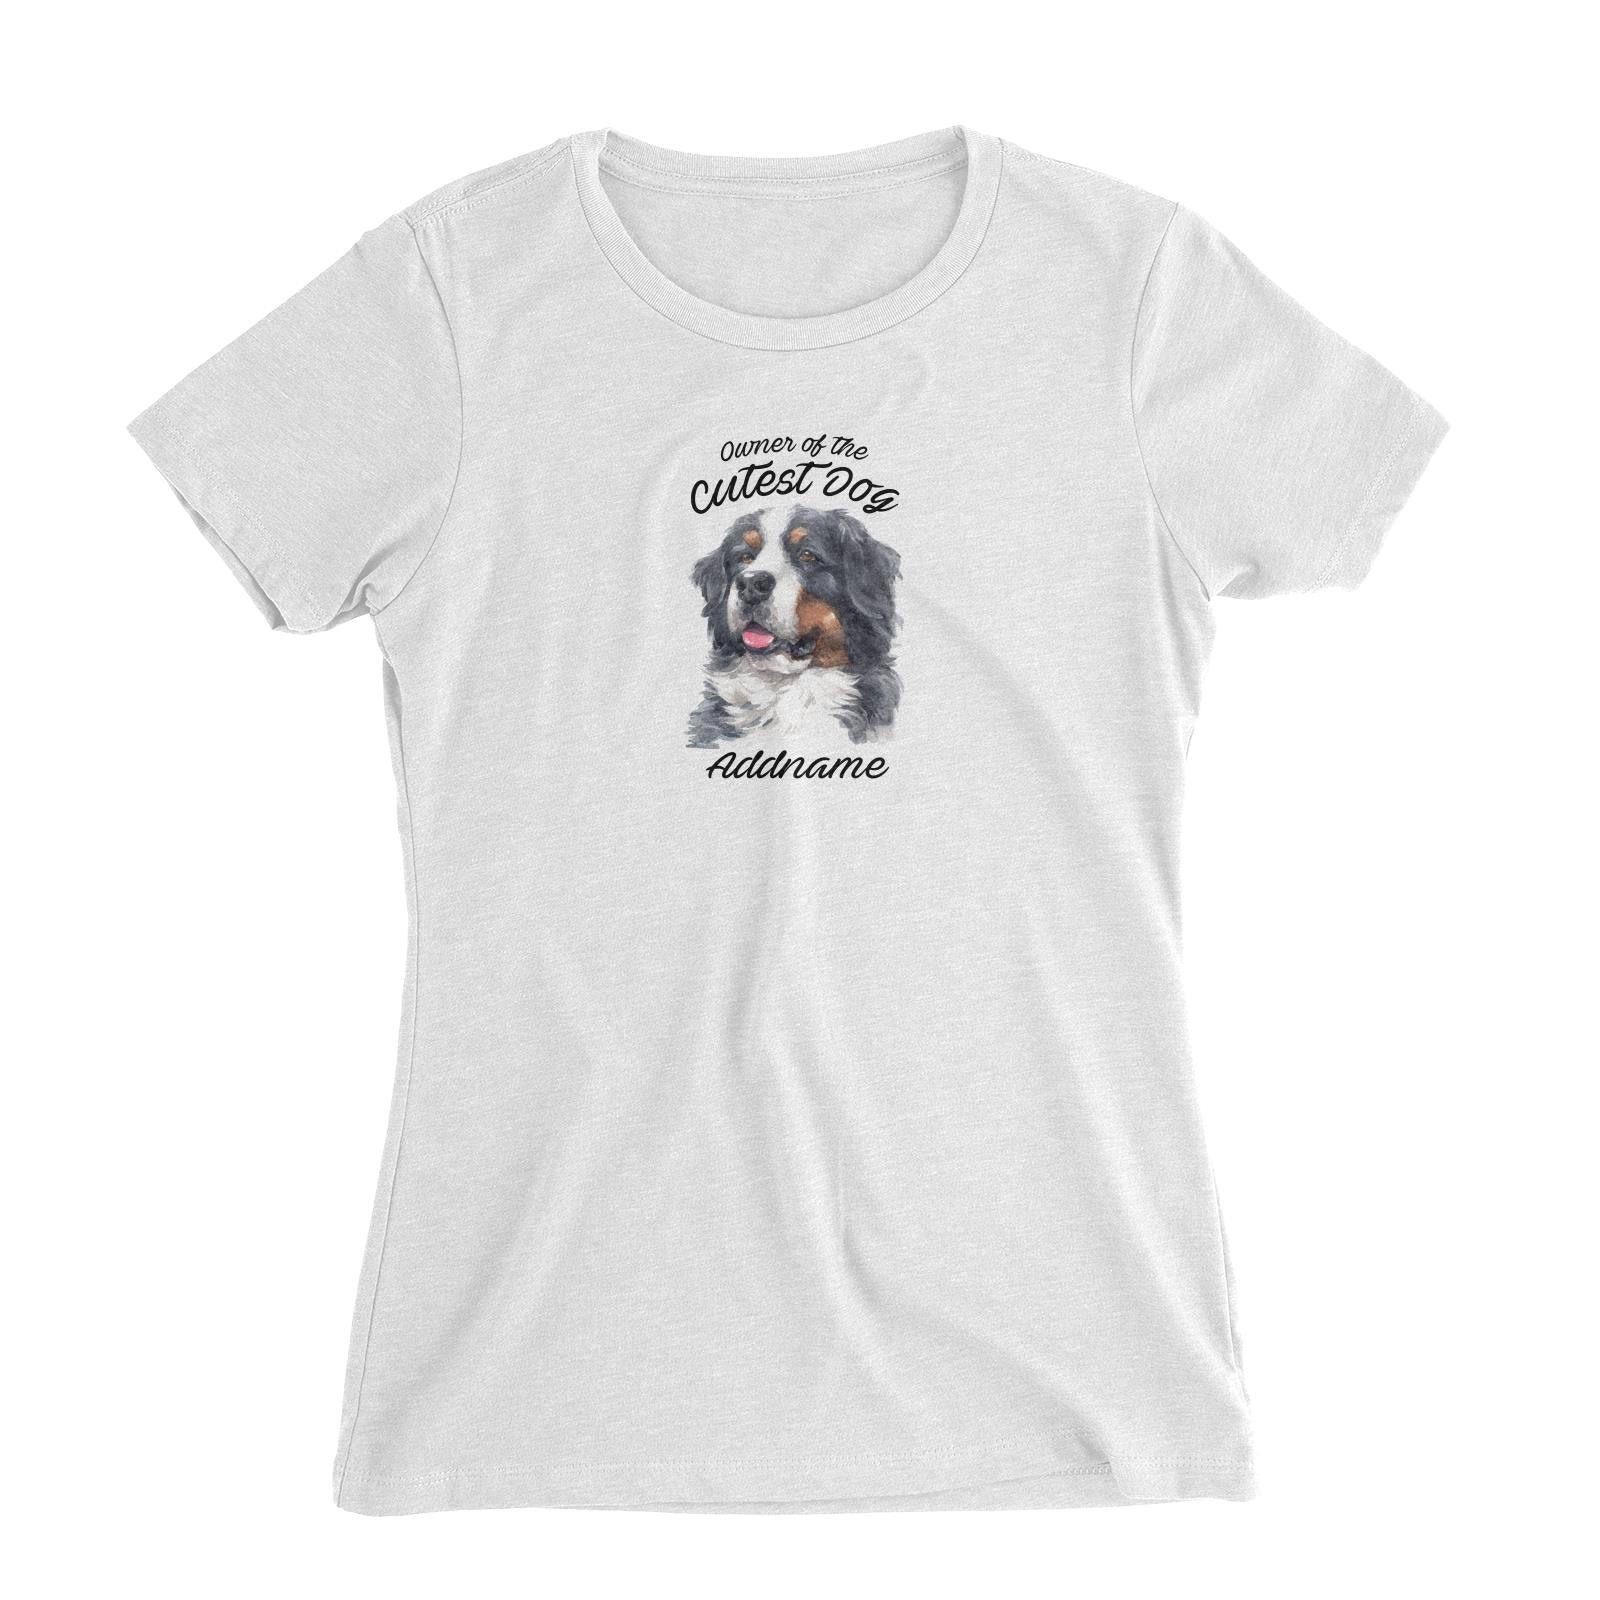 Watercolor Dog Owner Of The Cutest Dog Bernese Mountain Dog Addname Women's Slim Fit T-Shirt